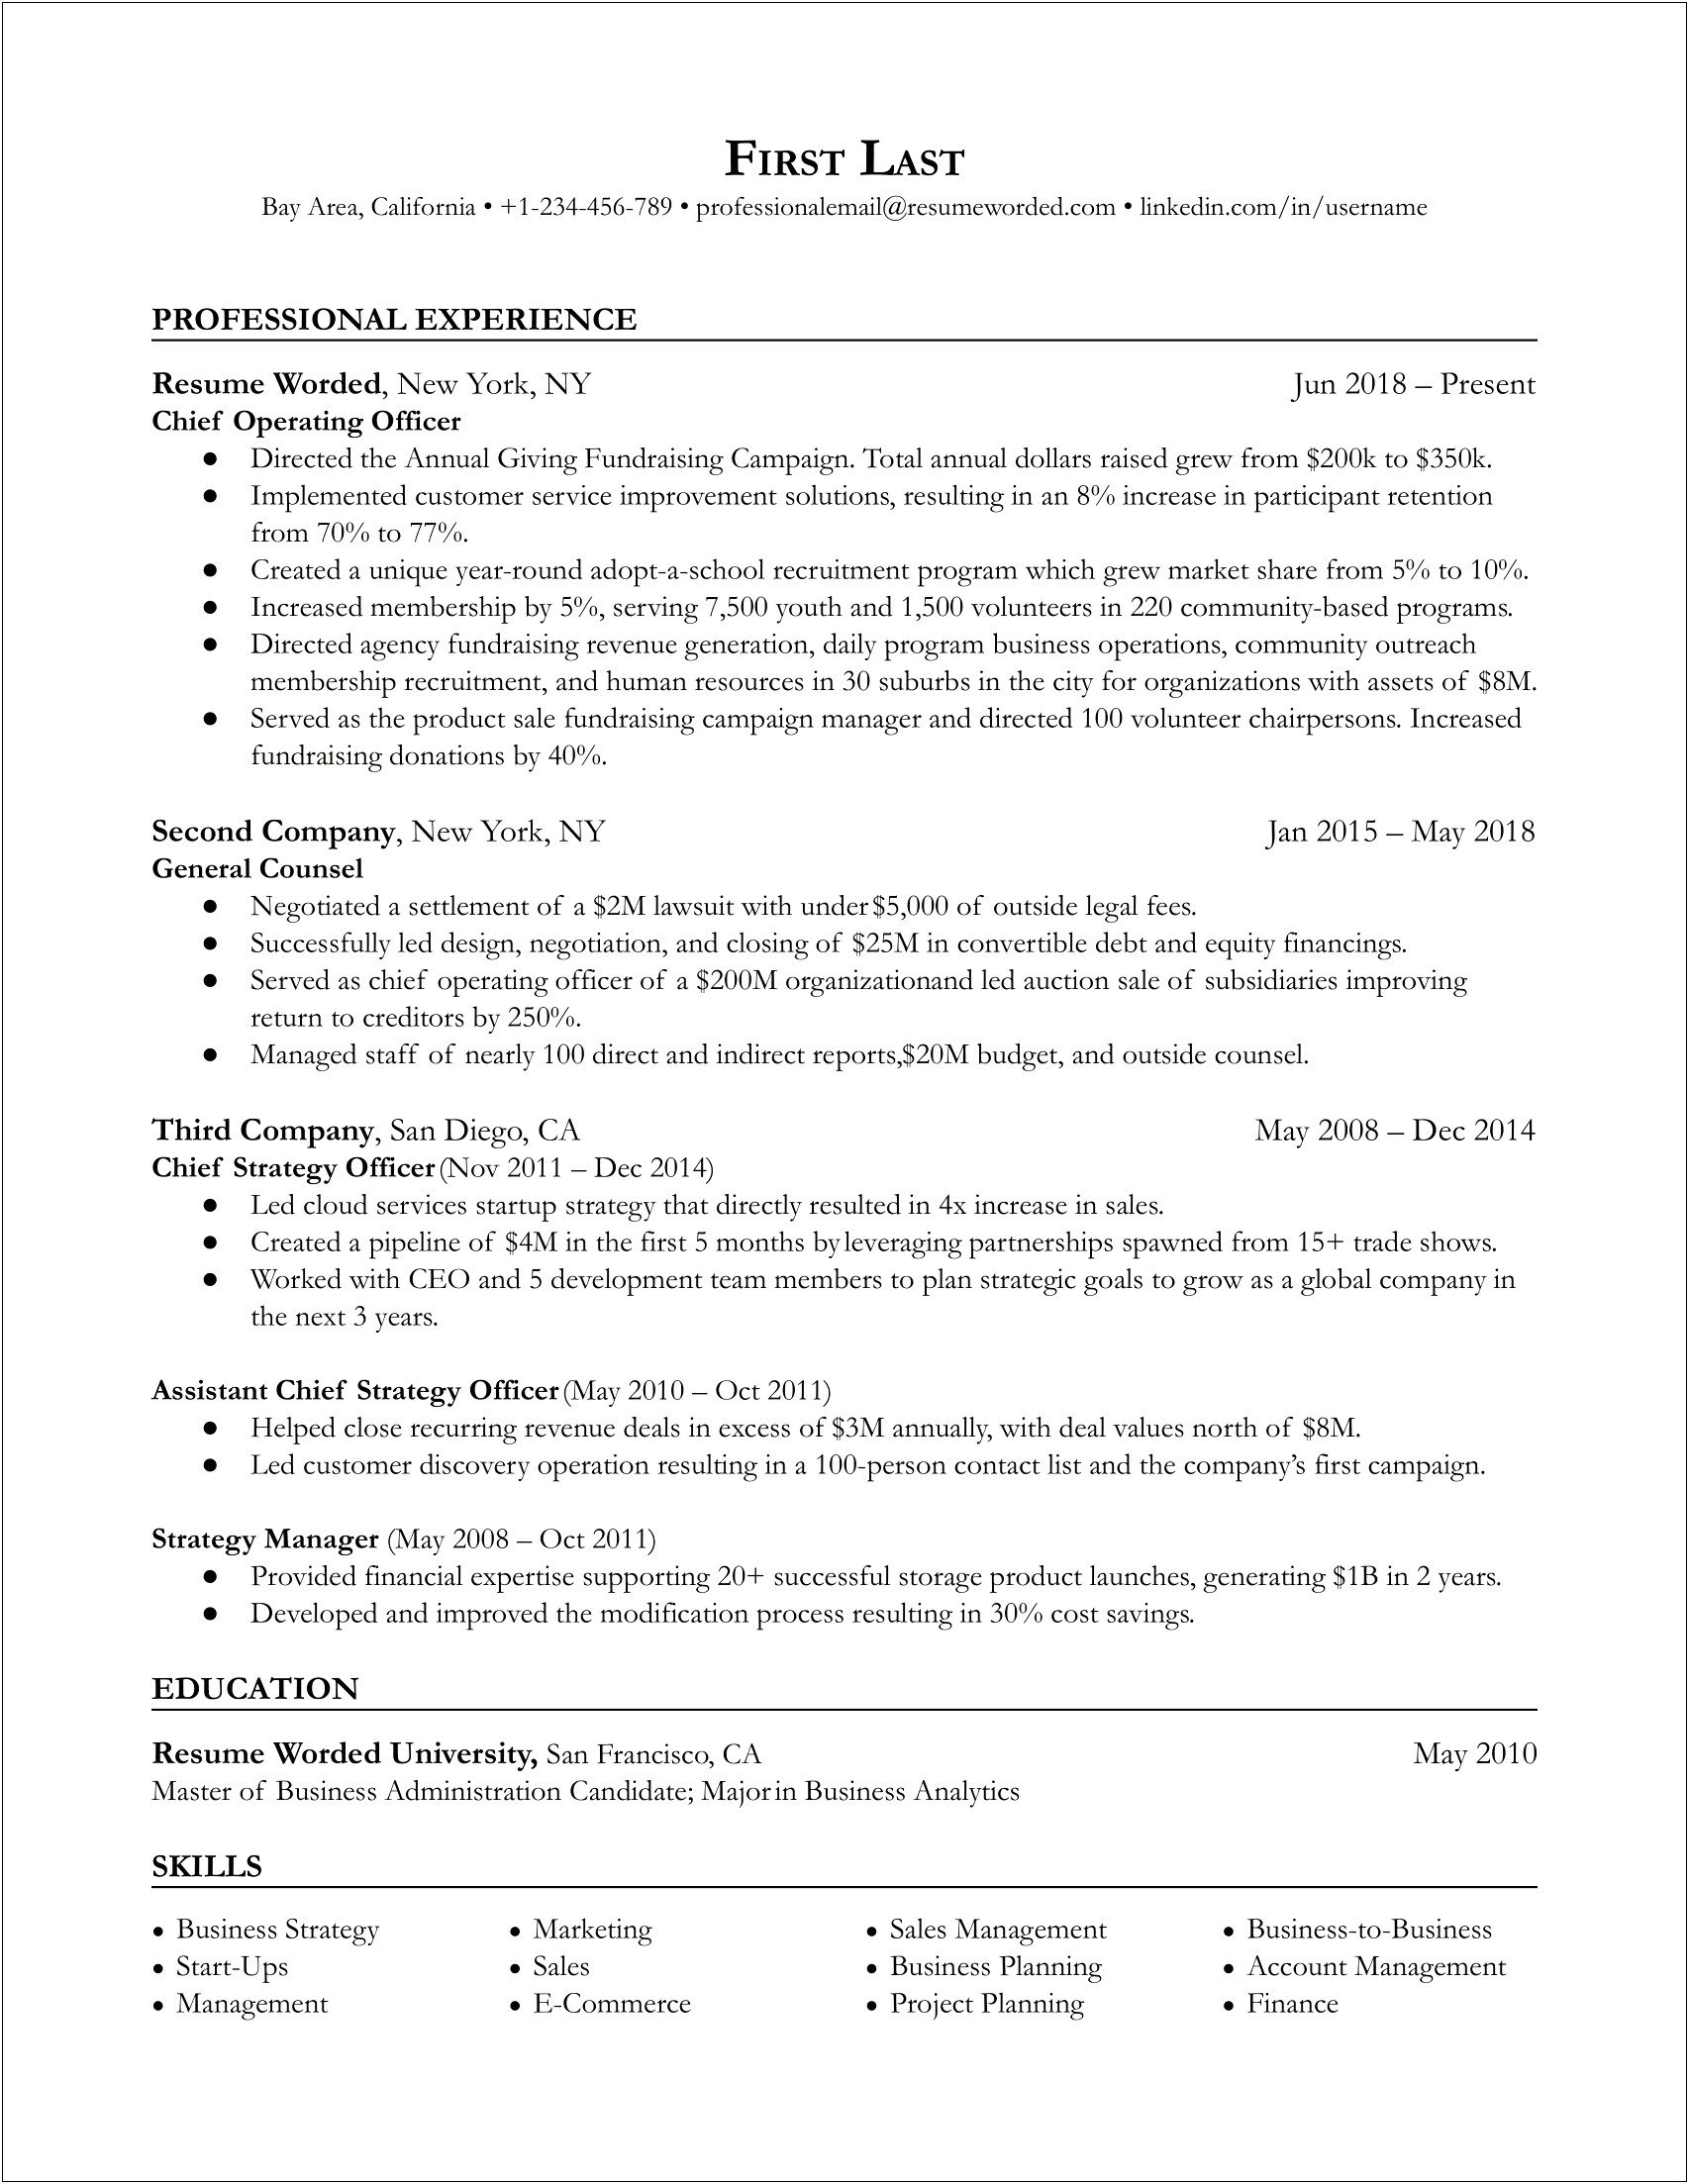 Mergers And Acquisitions Resume Template University